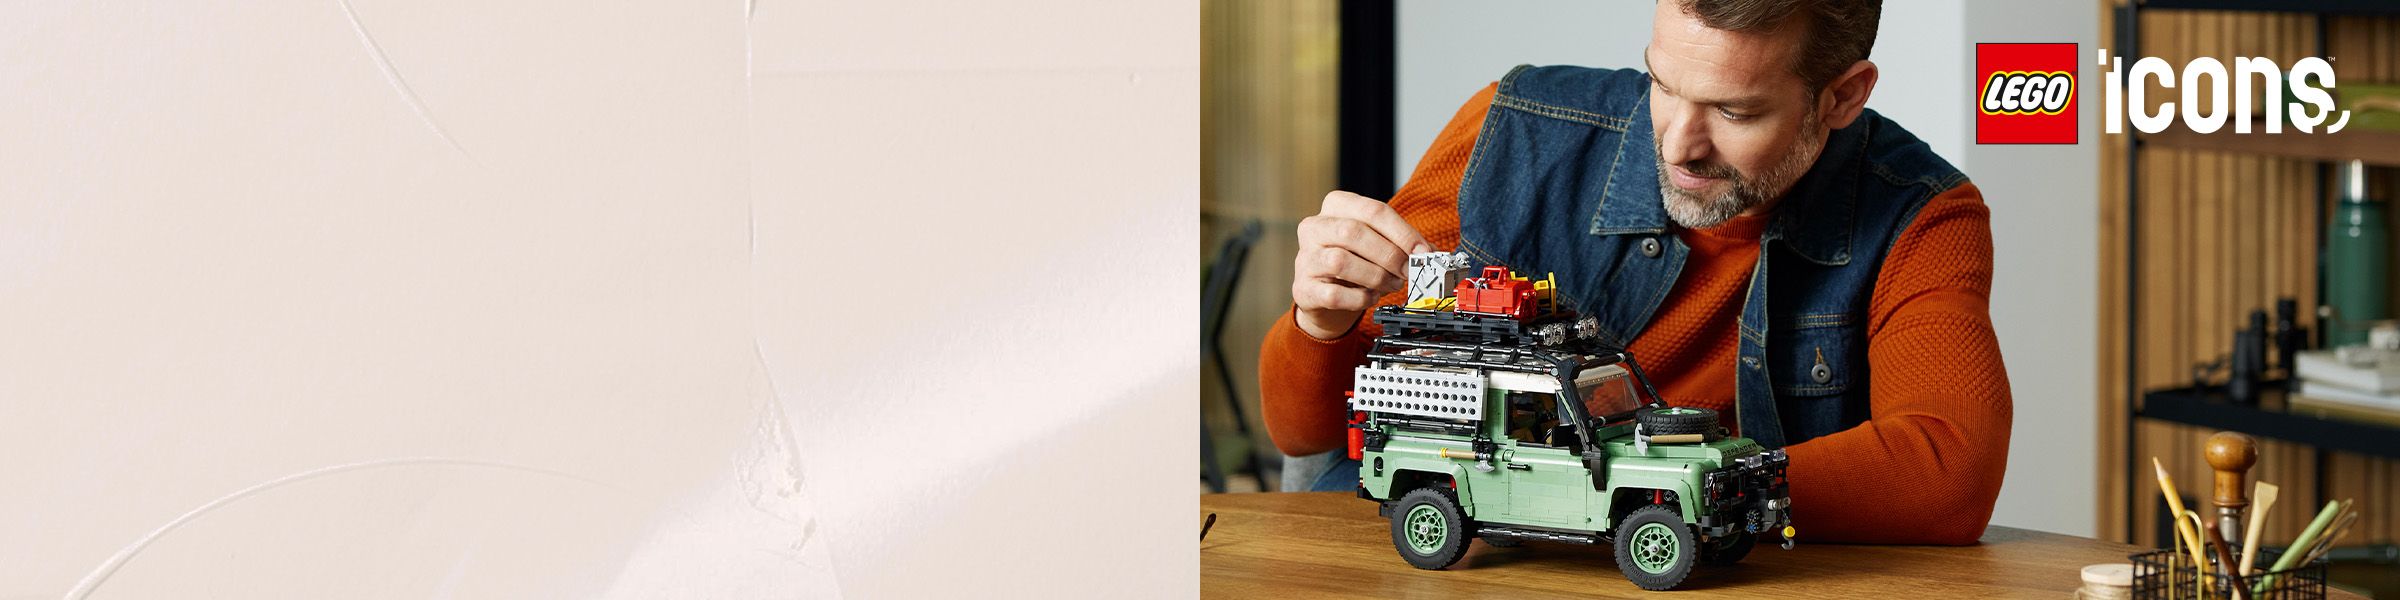 Lego icons - Man sitting at table with top lego four wheel drive car